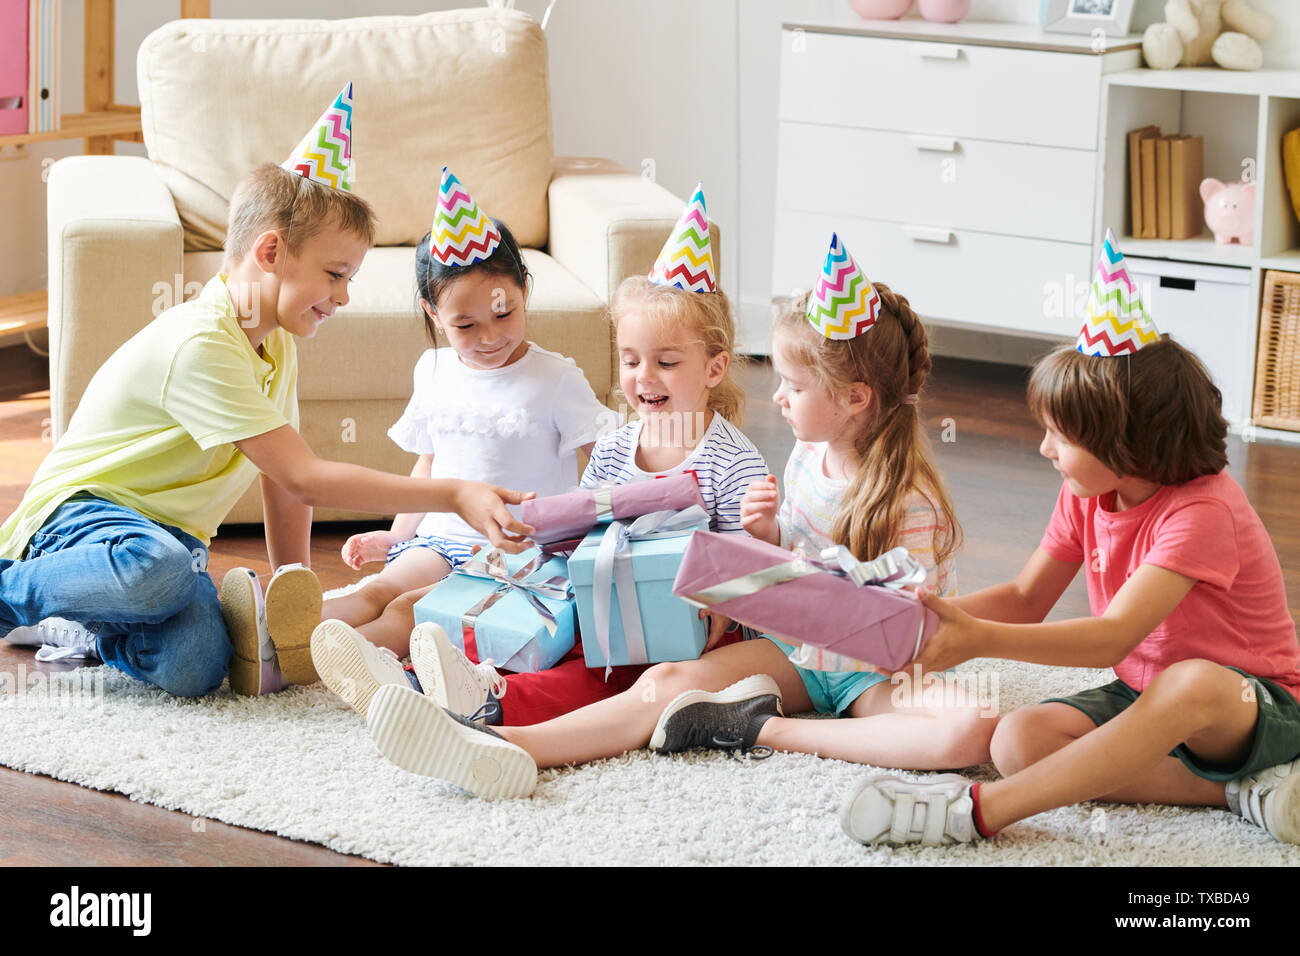 Group of adorable friends in birthday caps giving presents to happy blonde girl Stock Photo